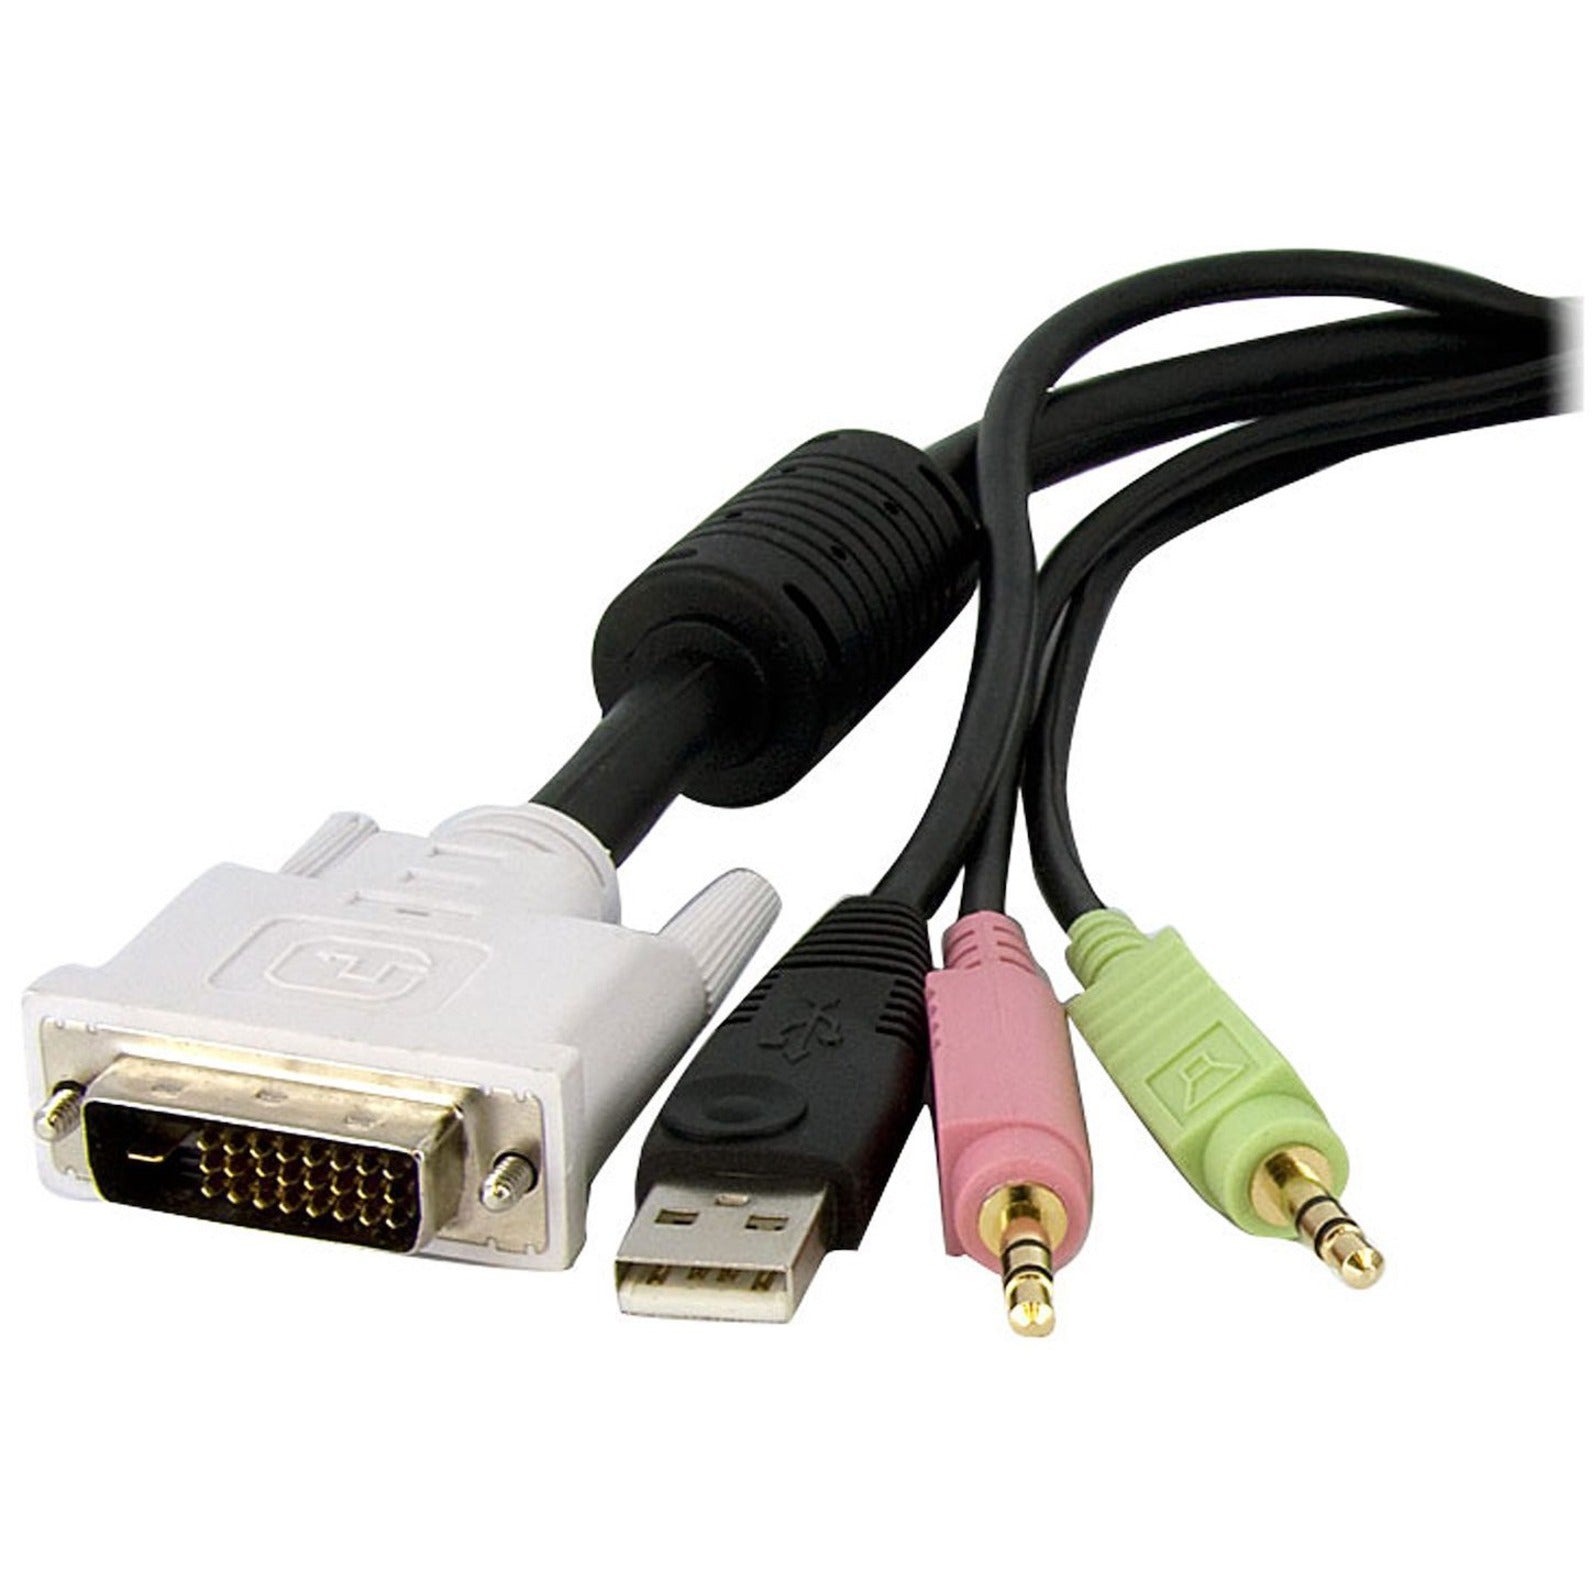 StarTech.com DVID4N1USB15 15ft 4-in-1 USB Dual Link DVI-D KVM Switch Cable with Audio & Microphone, Copper Conductor, 7.9 Gbit/s Data Transfer Rate